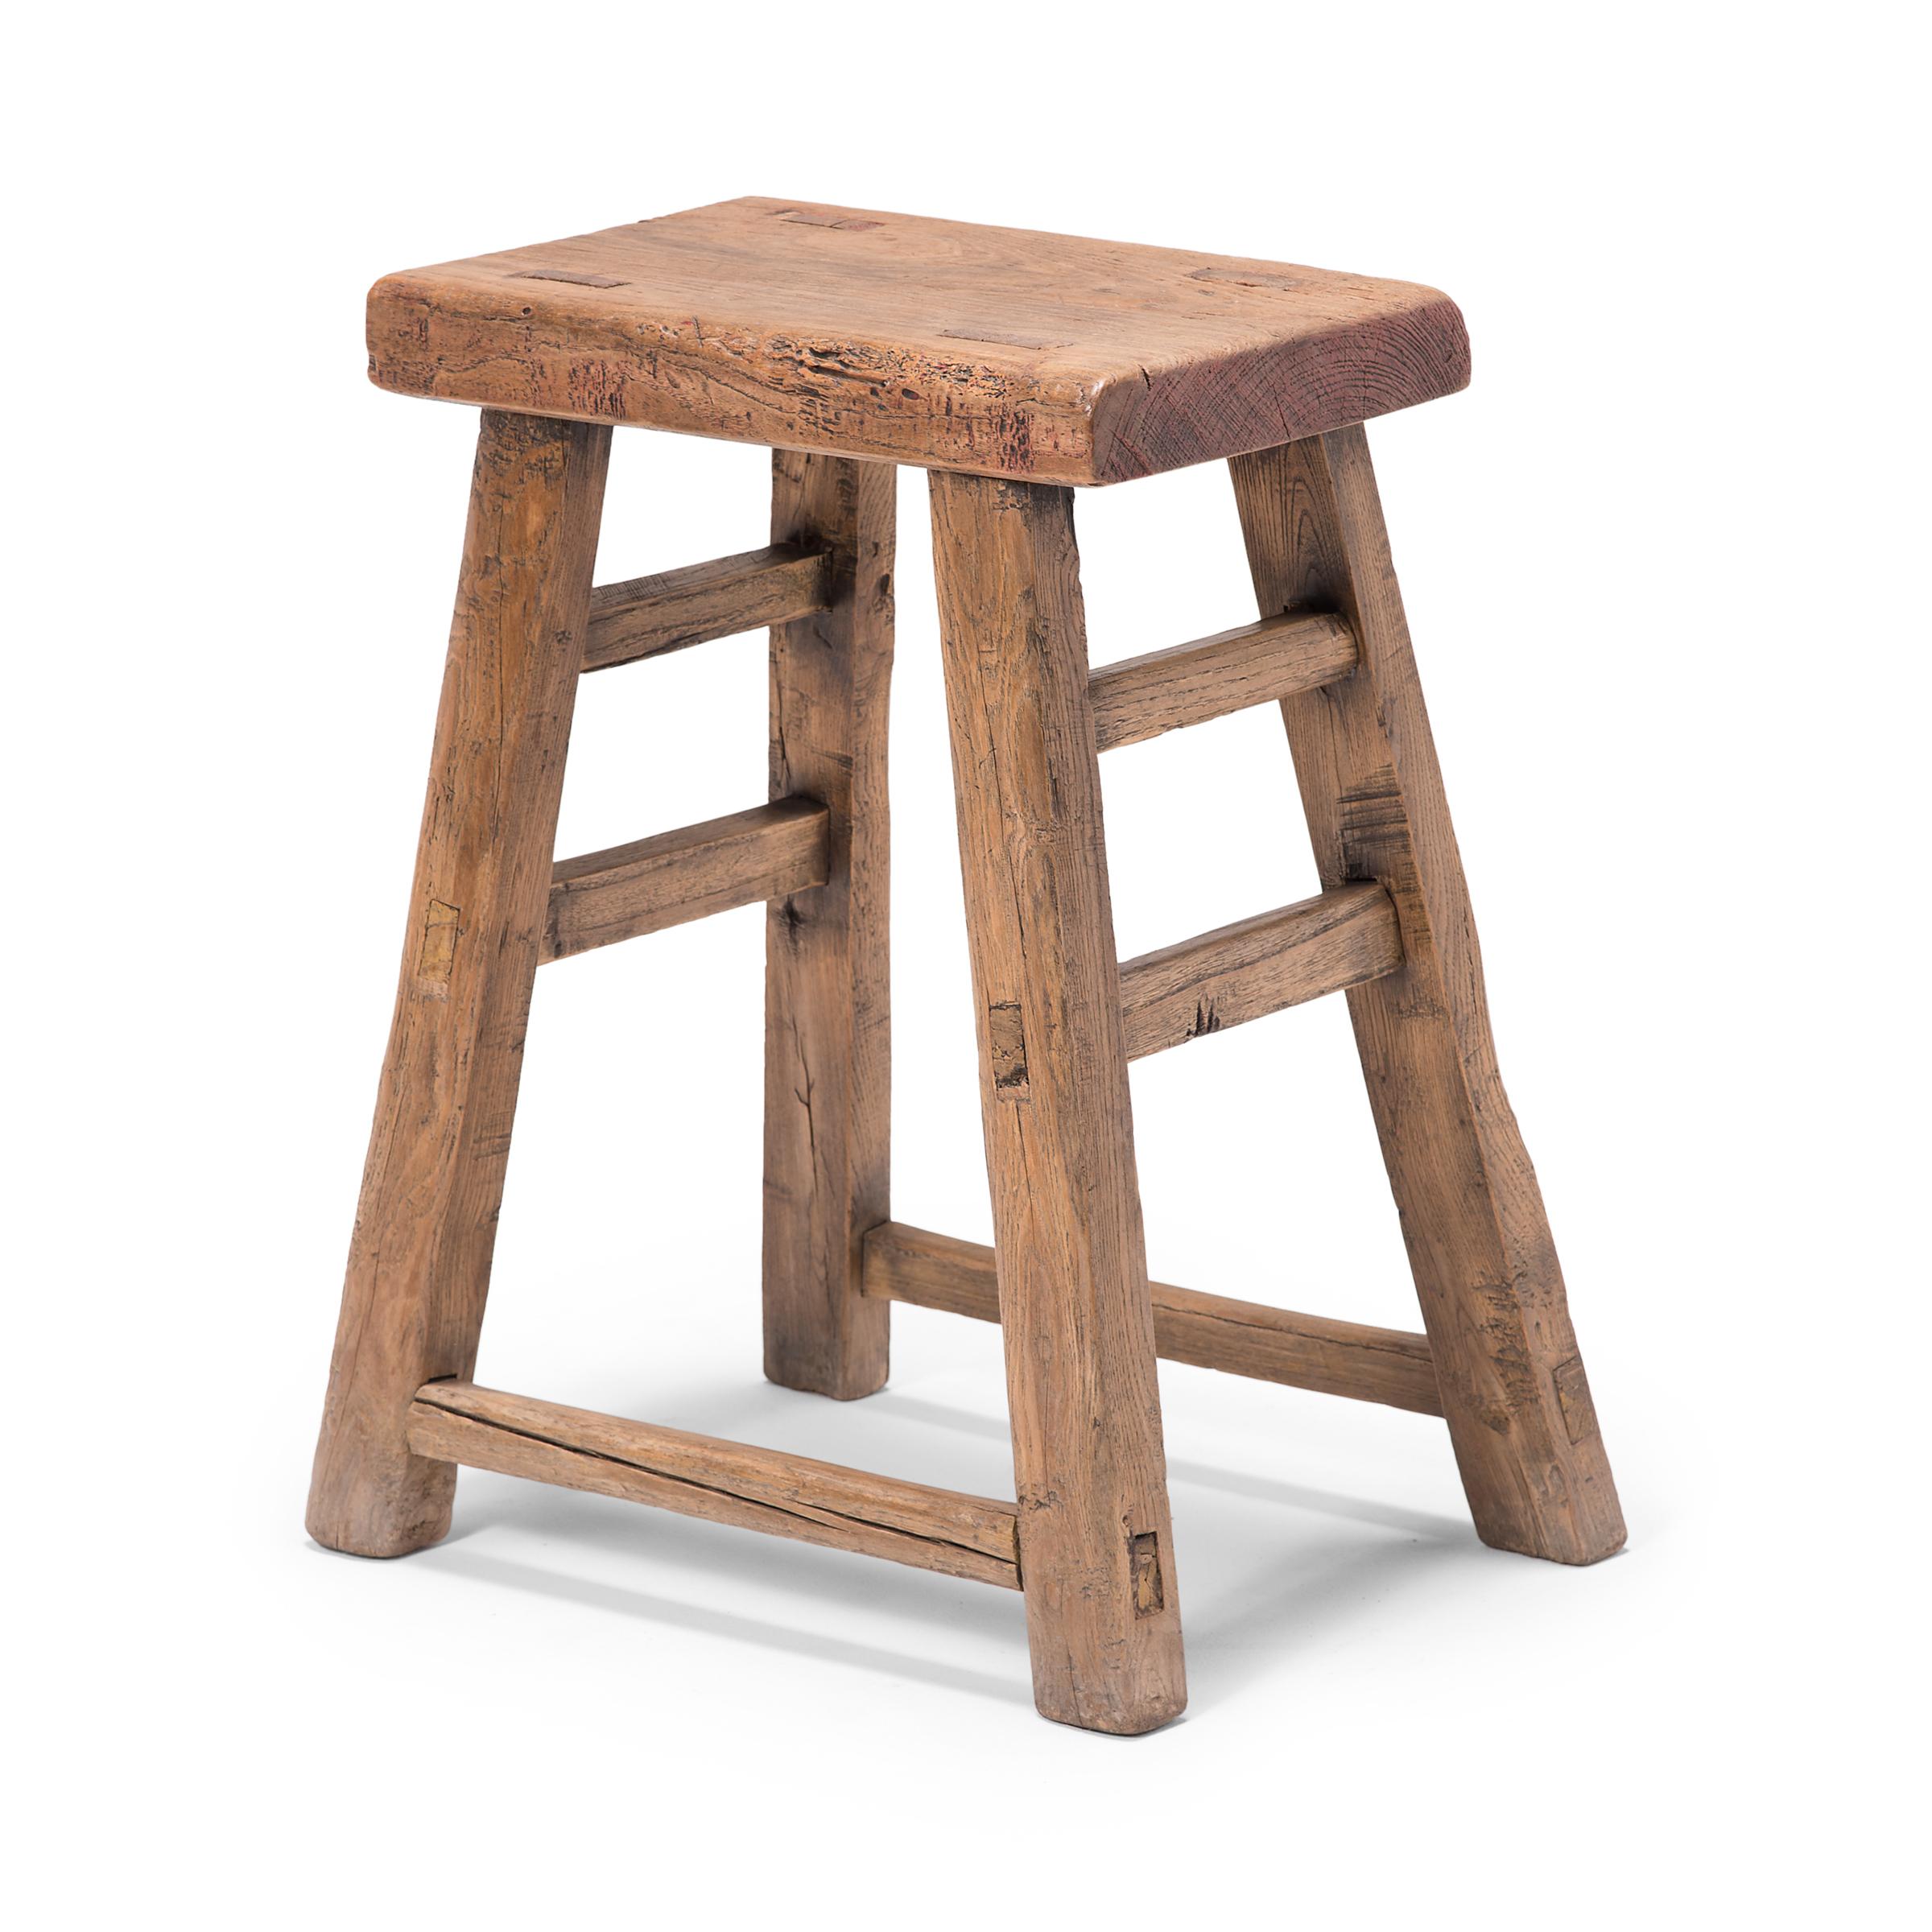 This early 20th century stool from China's Hebei province features a square seat supported by splayed legs, linked with simple double stretcher bars. Constructed with mortise-and-tenon joinery techniques, without the use of nails or screws, the